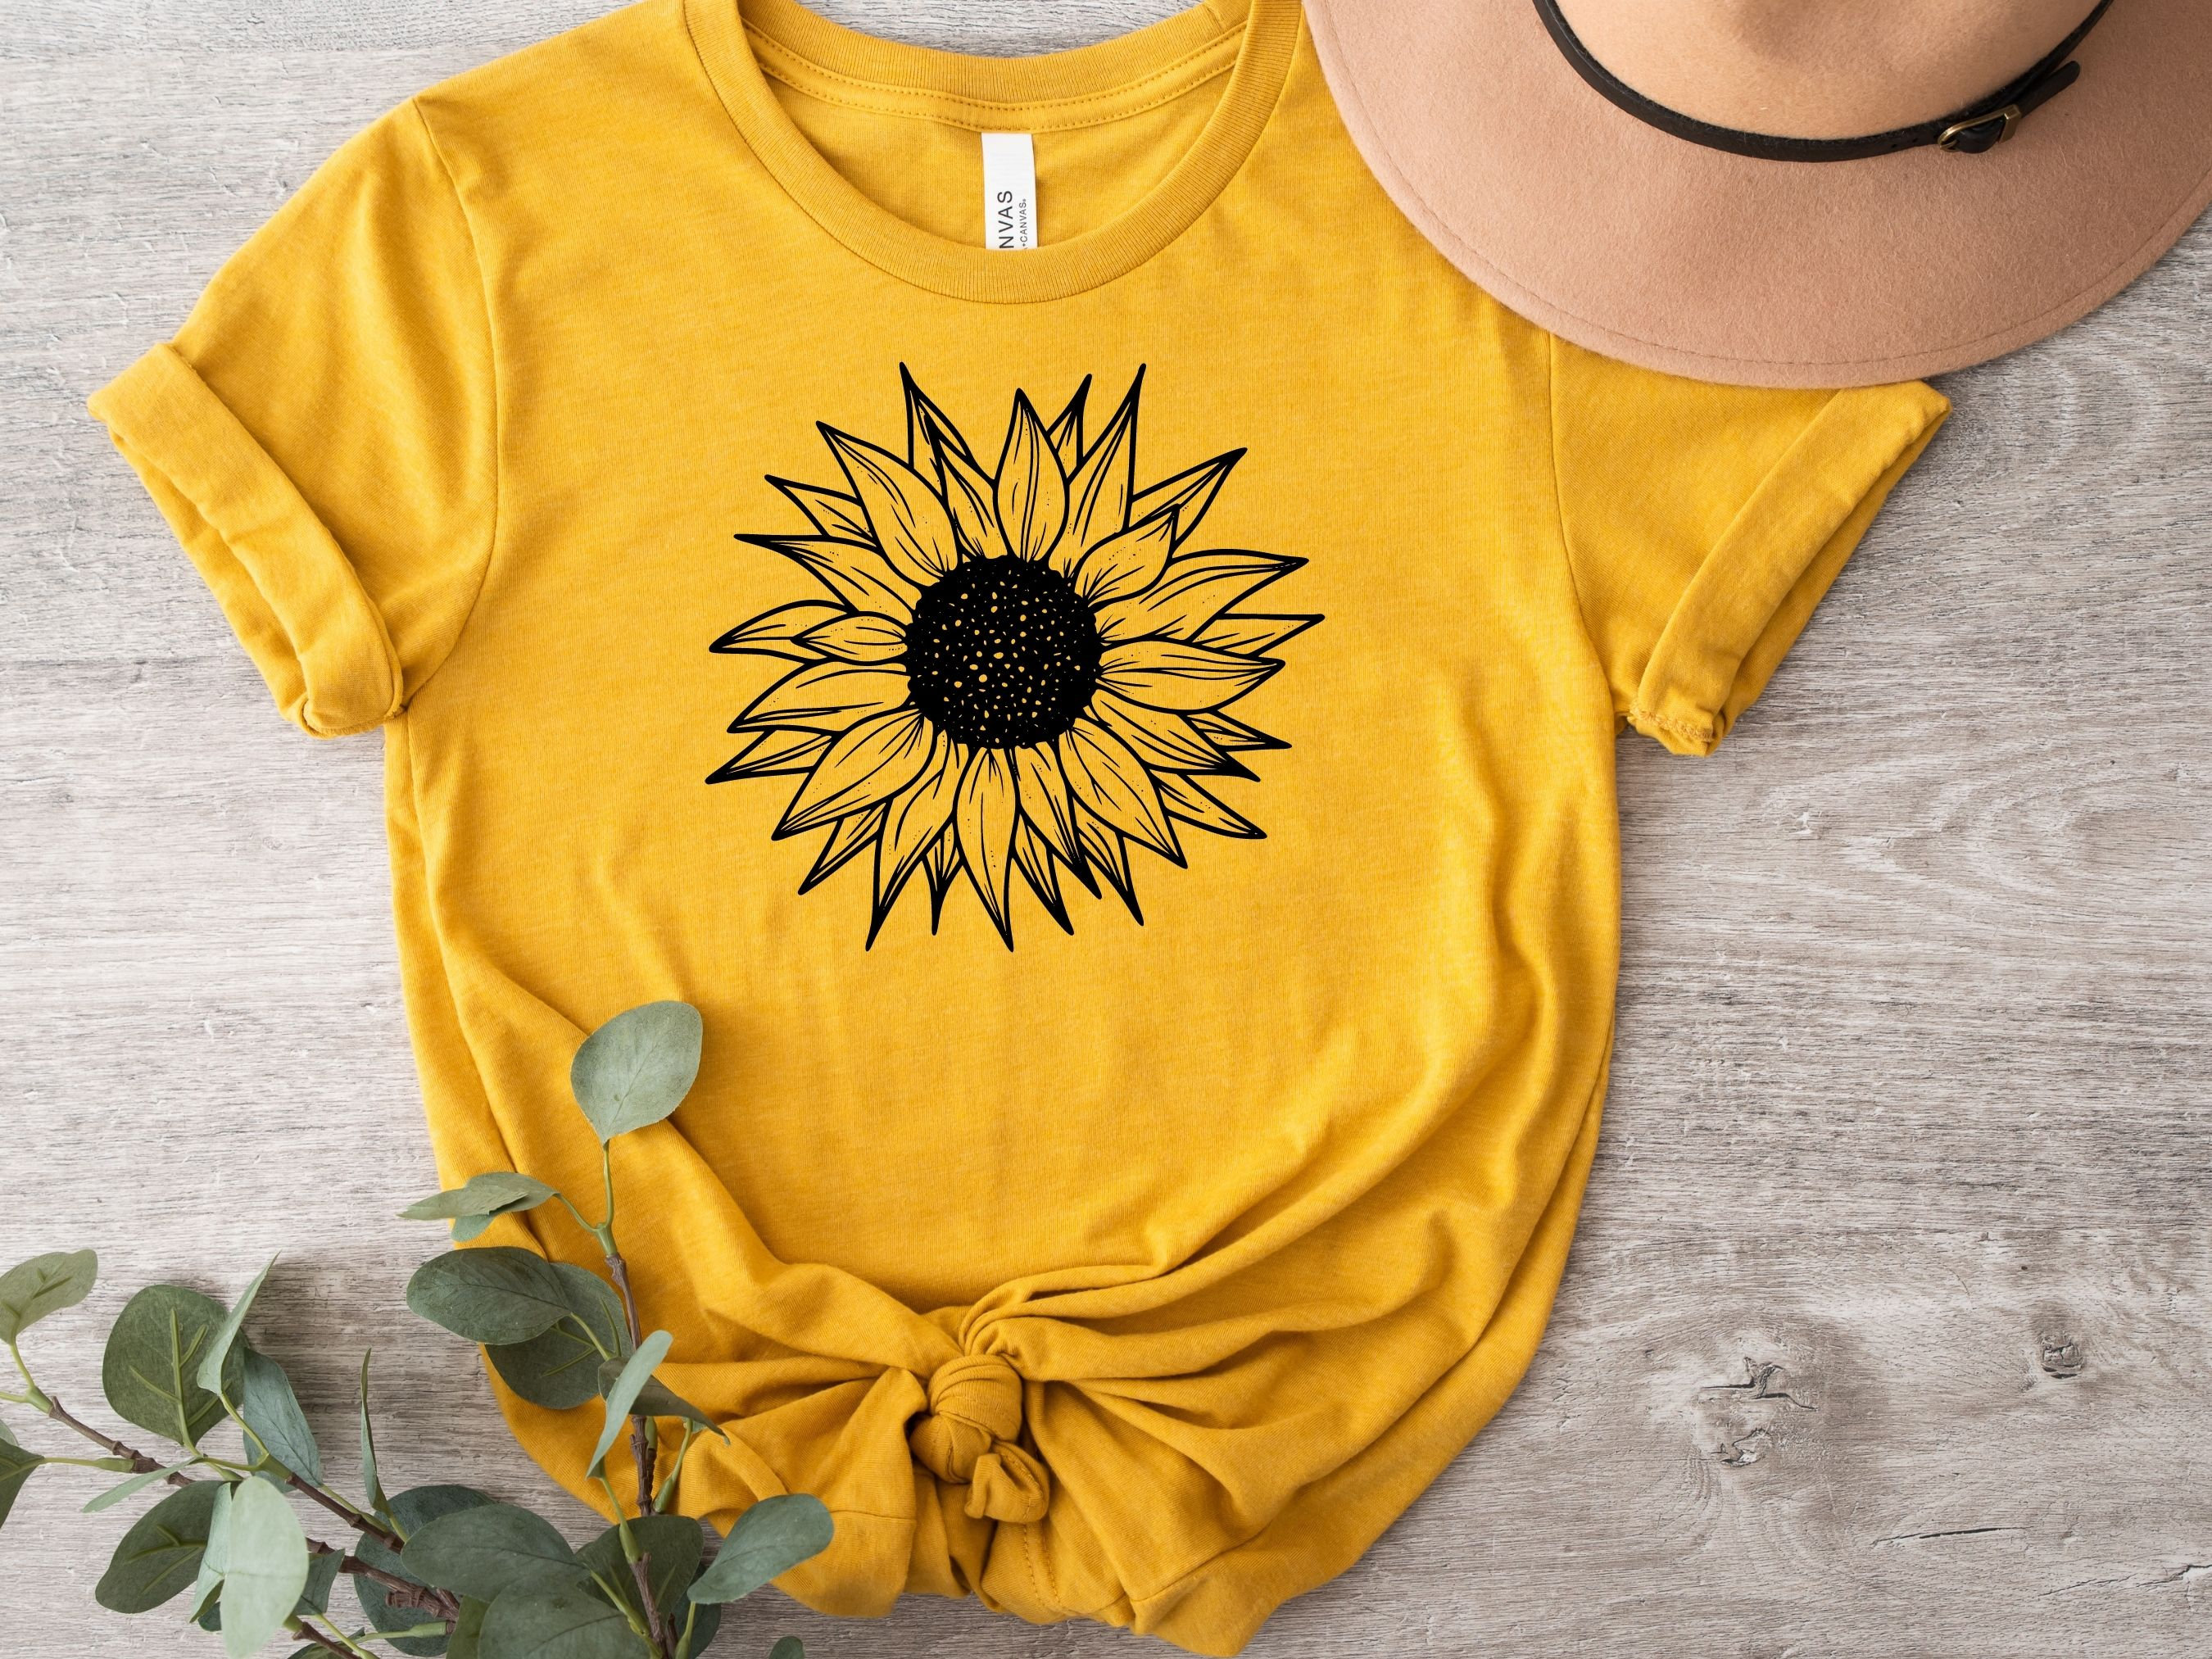 Kleding Unisex kinderkleding Tops & T-shirts Toddler fun Sunflowers pullover sweatshirt with a skirt yellow/ bright orange with a girly skirt!!! cowl style collar wear it up or down 